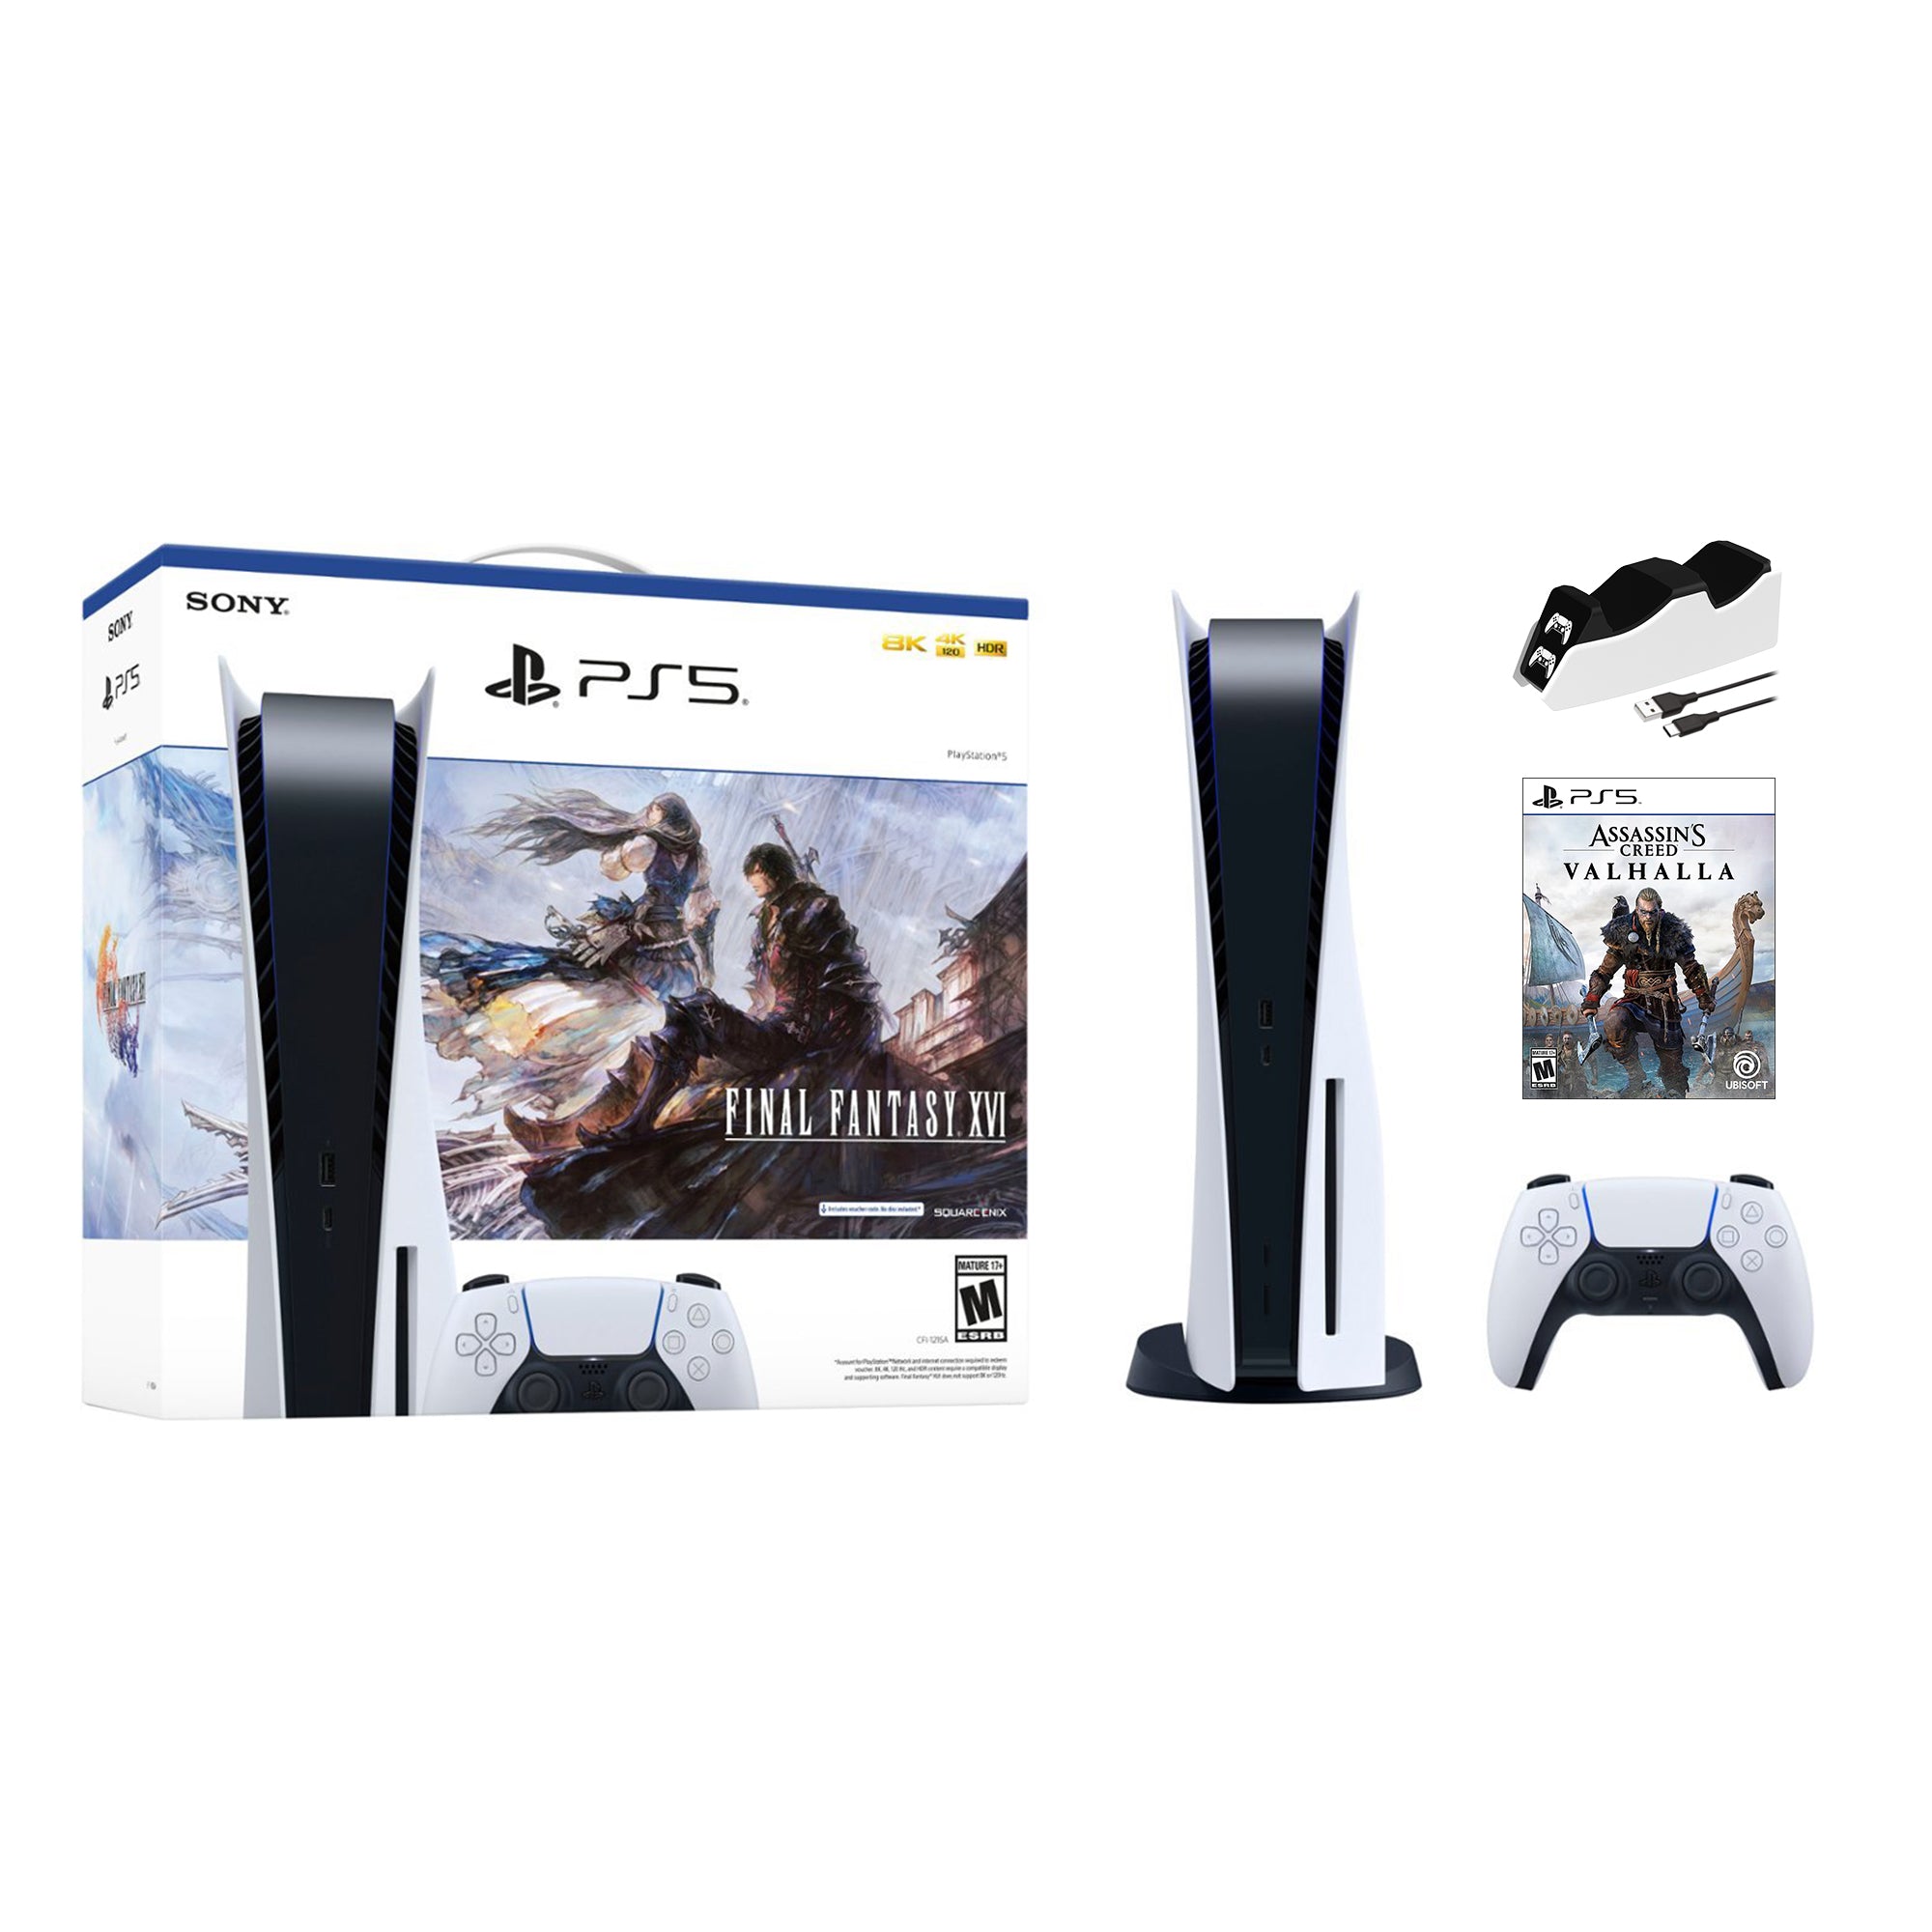 Playstation 5 Disc Edition FINAL FANTASY XVI Bundle with Assassin's Creed Valhalla and Mytrix Controller Charger - PS5, White